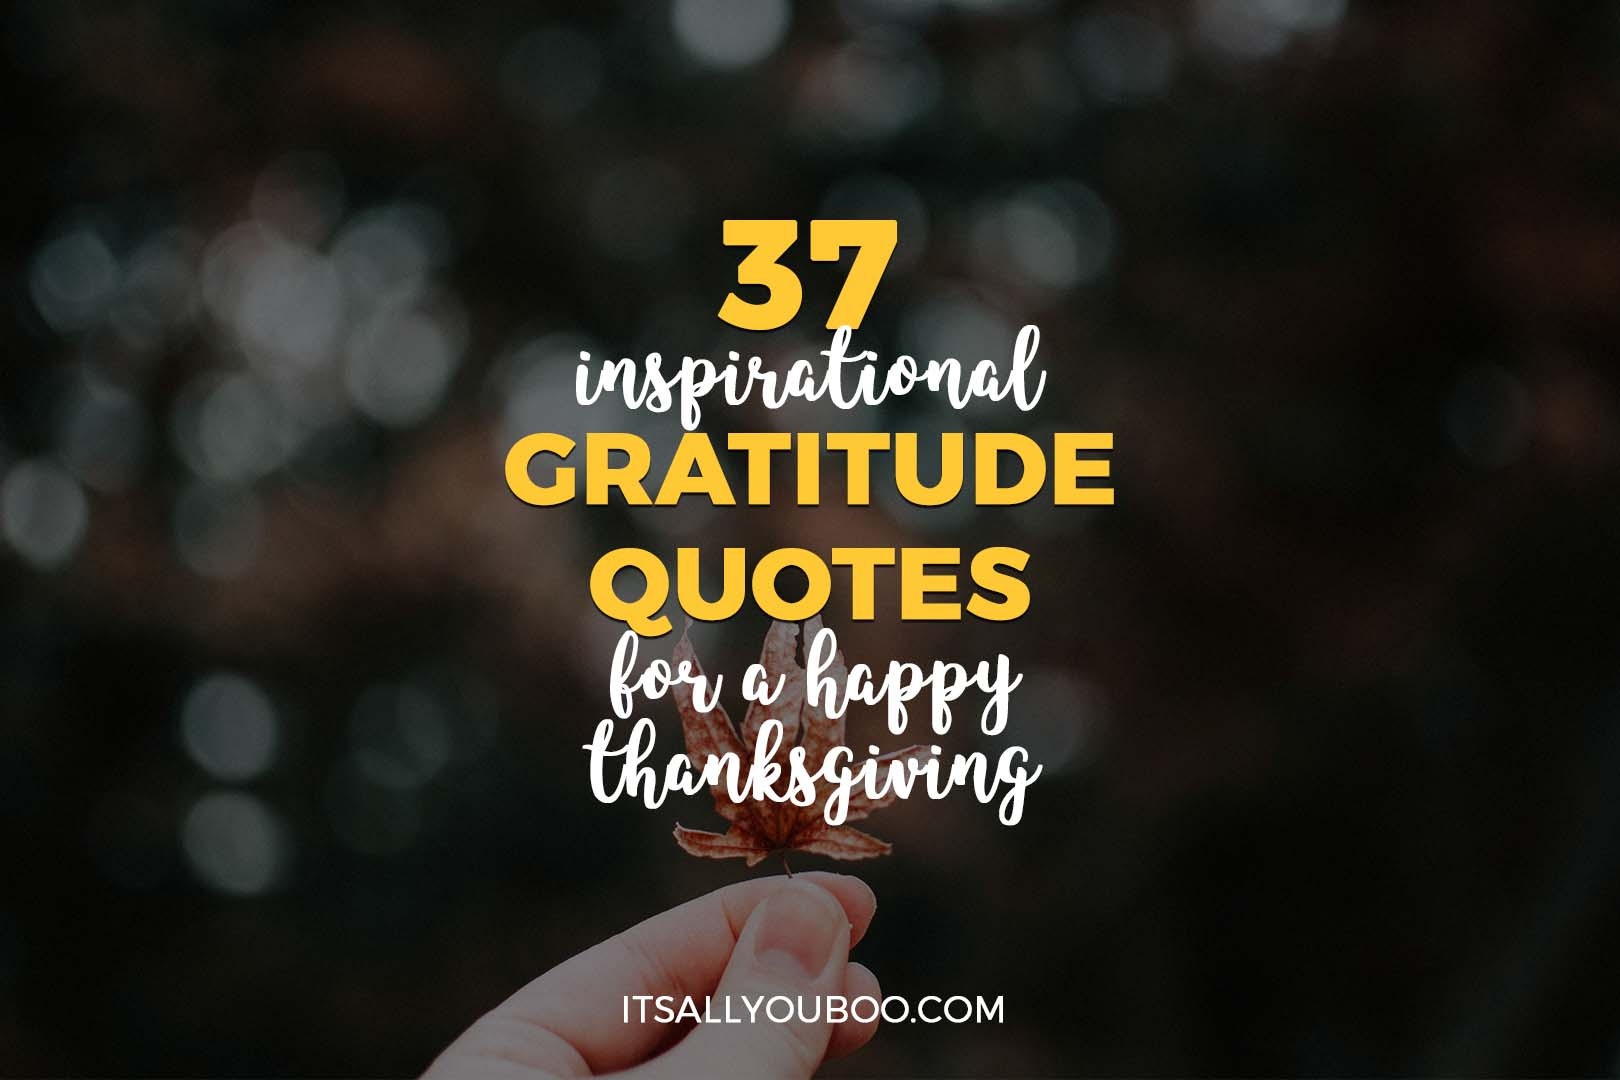 Happy Thanksgiving Quotes Inspirational
 37 Inspirational Gratitude Quotes for a Happy Thanksgiving